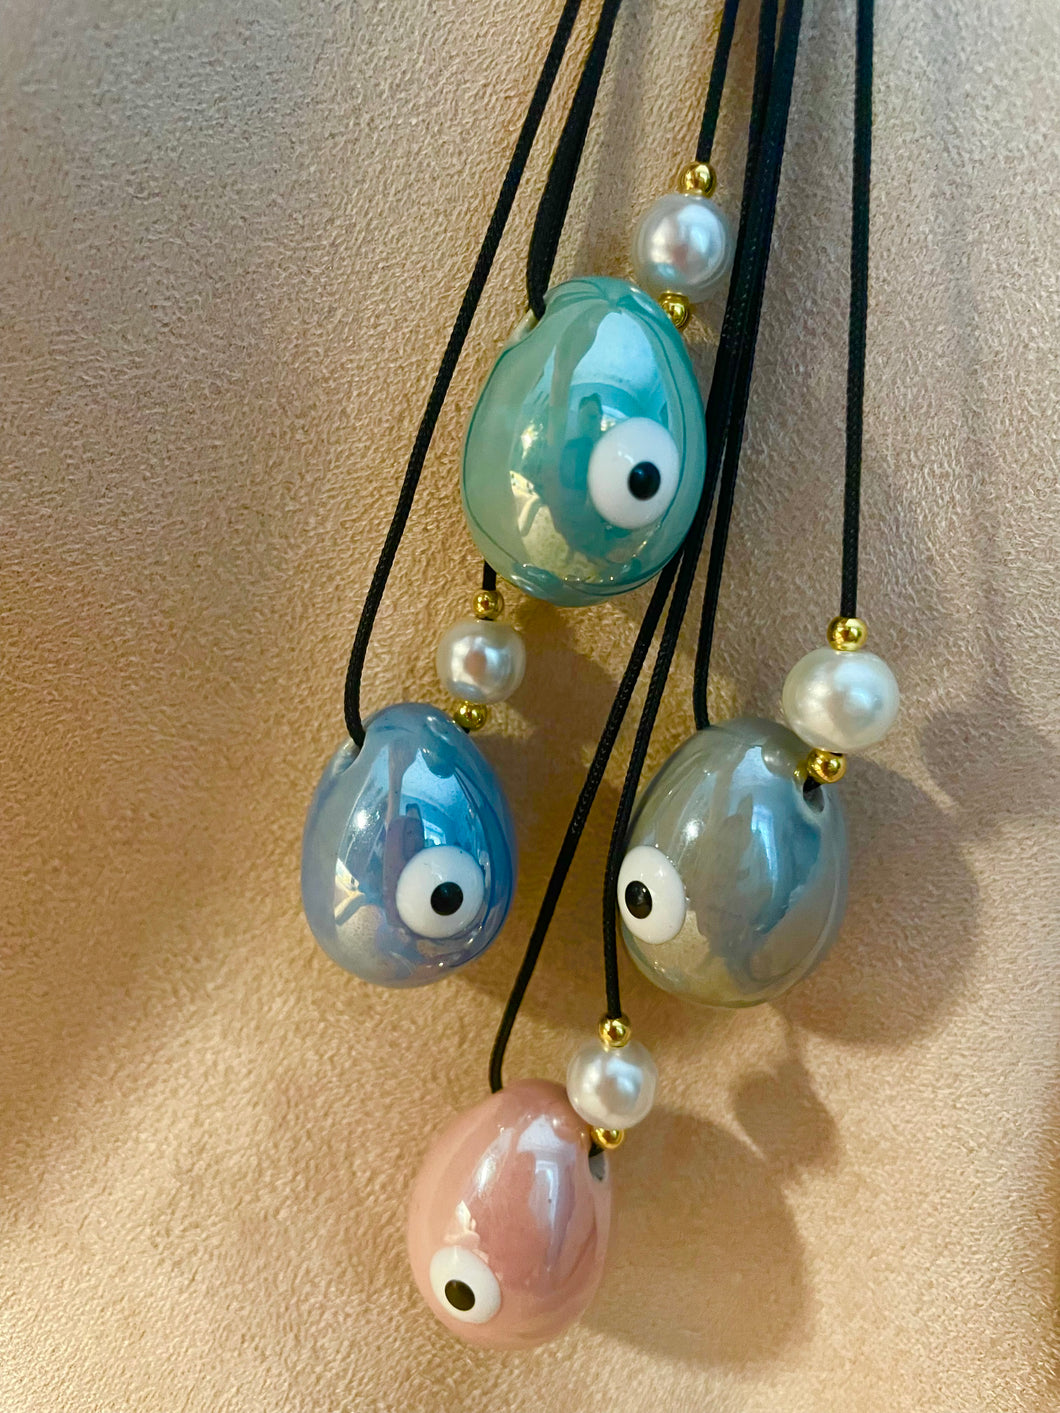 Handmade Easter Evil Eye  Eggs Pendant  with pearl and black cord